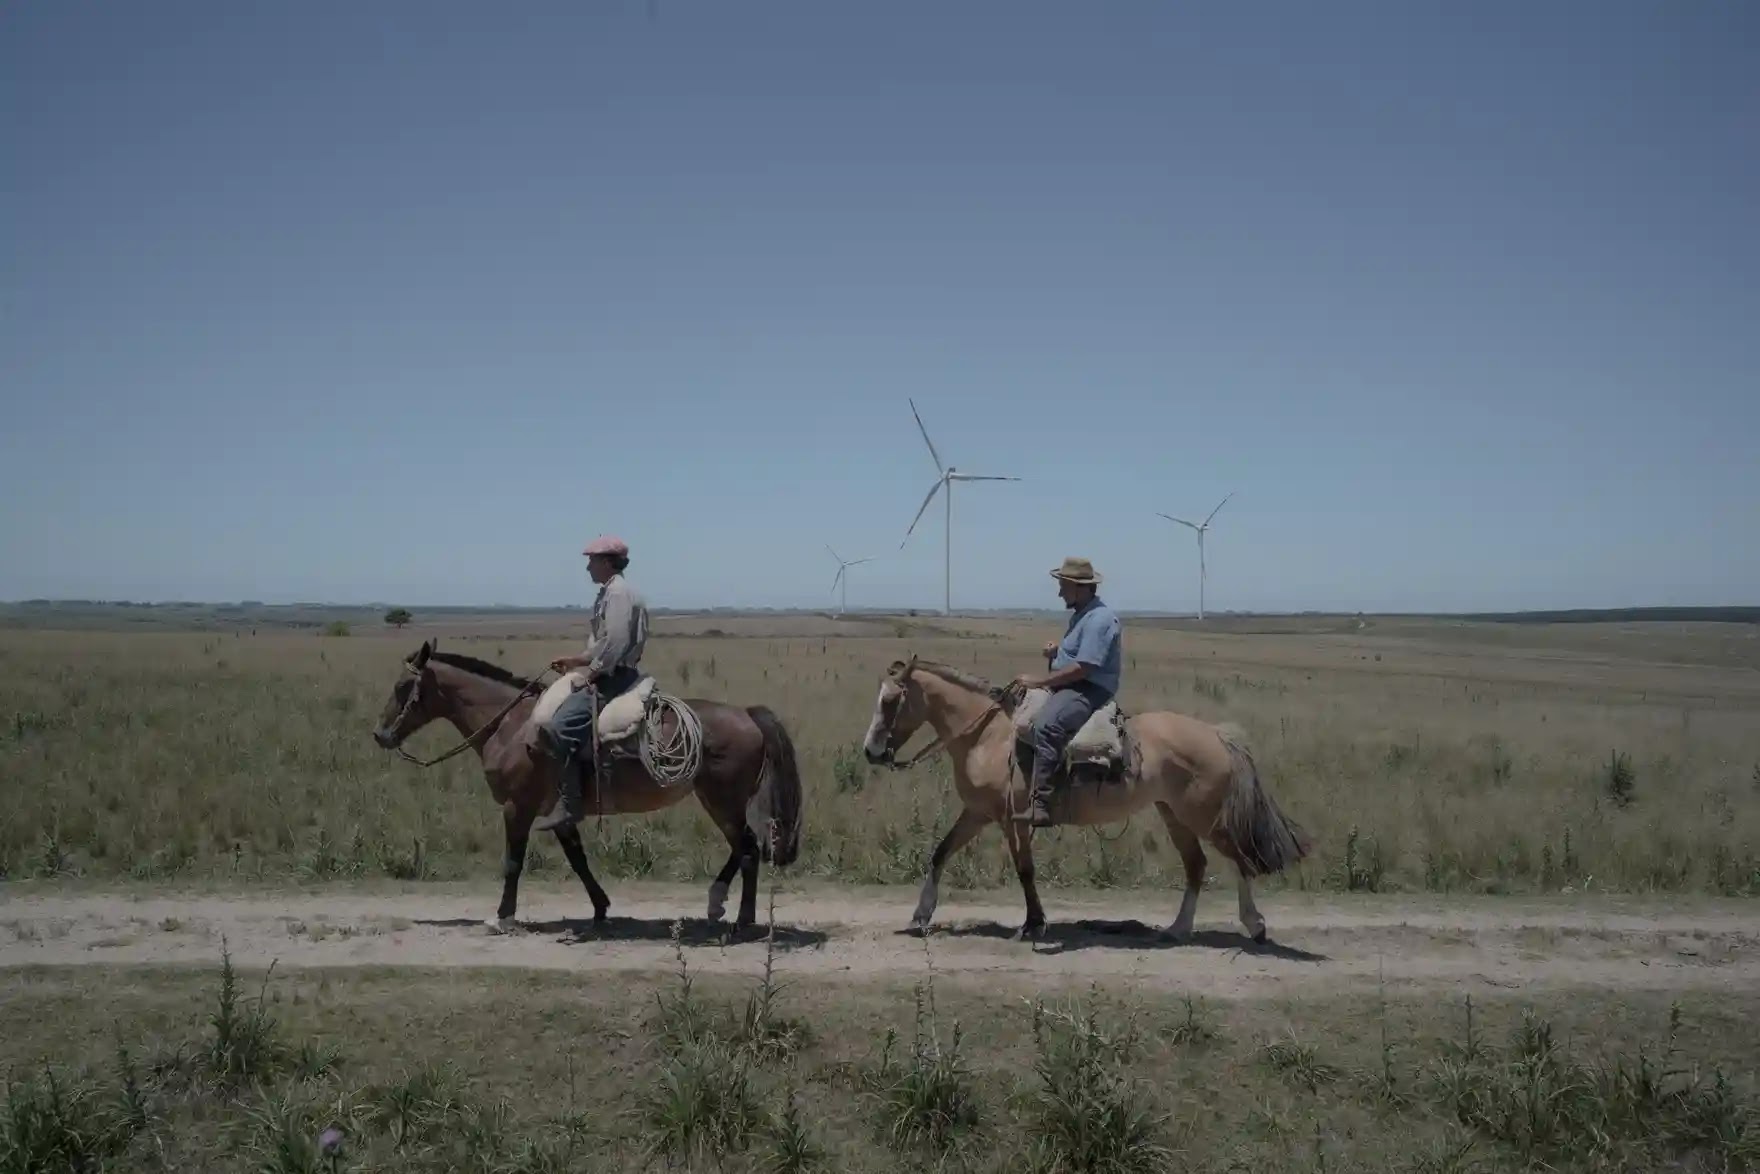 Two men ride horses along a track on a plain, in the background are several wind turbines